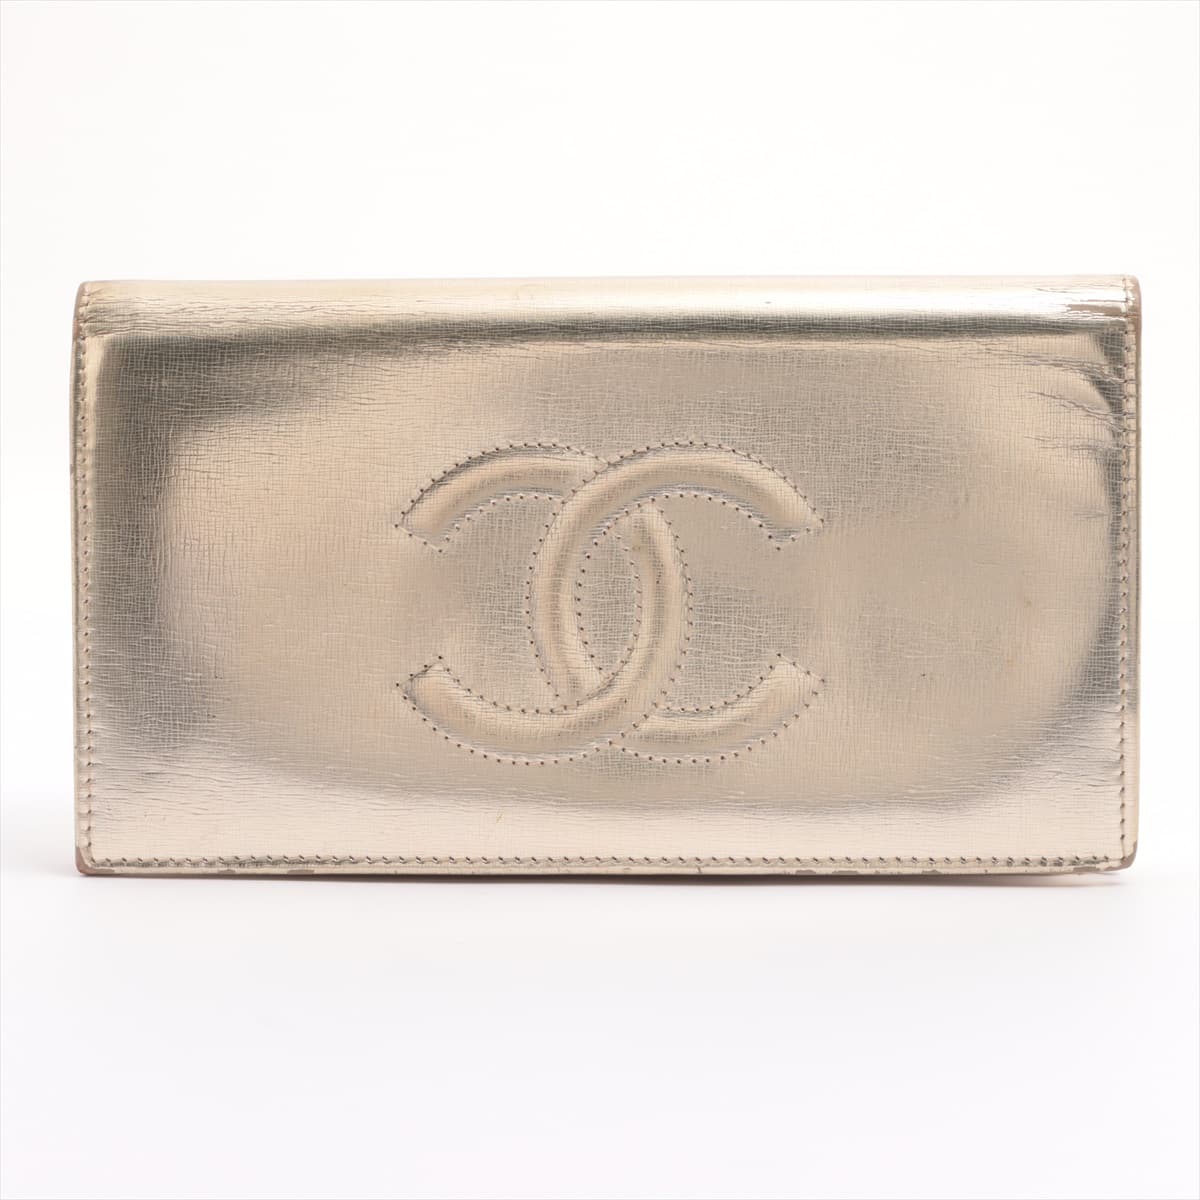 Chanel Coco Mark Leather Wallet Gold Gold Metal fittings 12XXXXXX